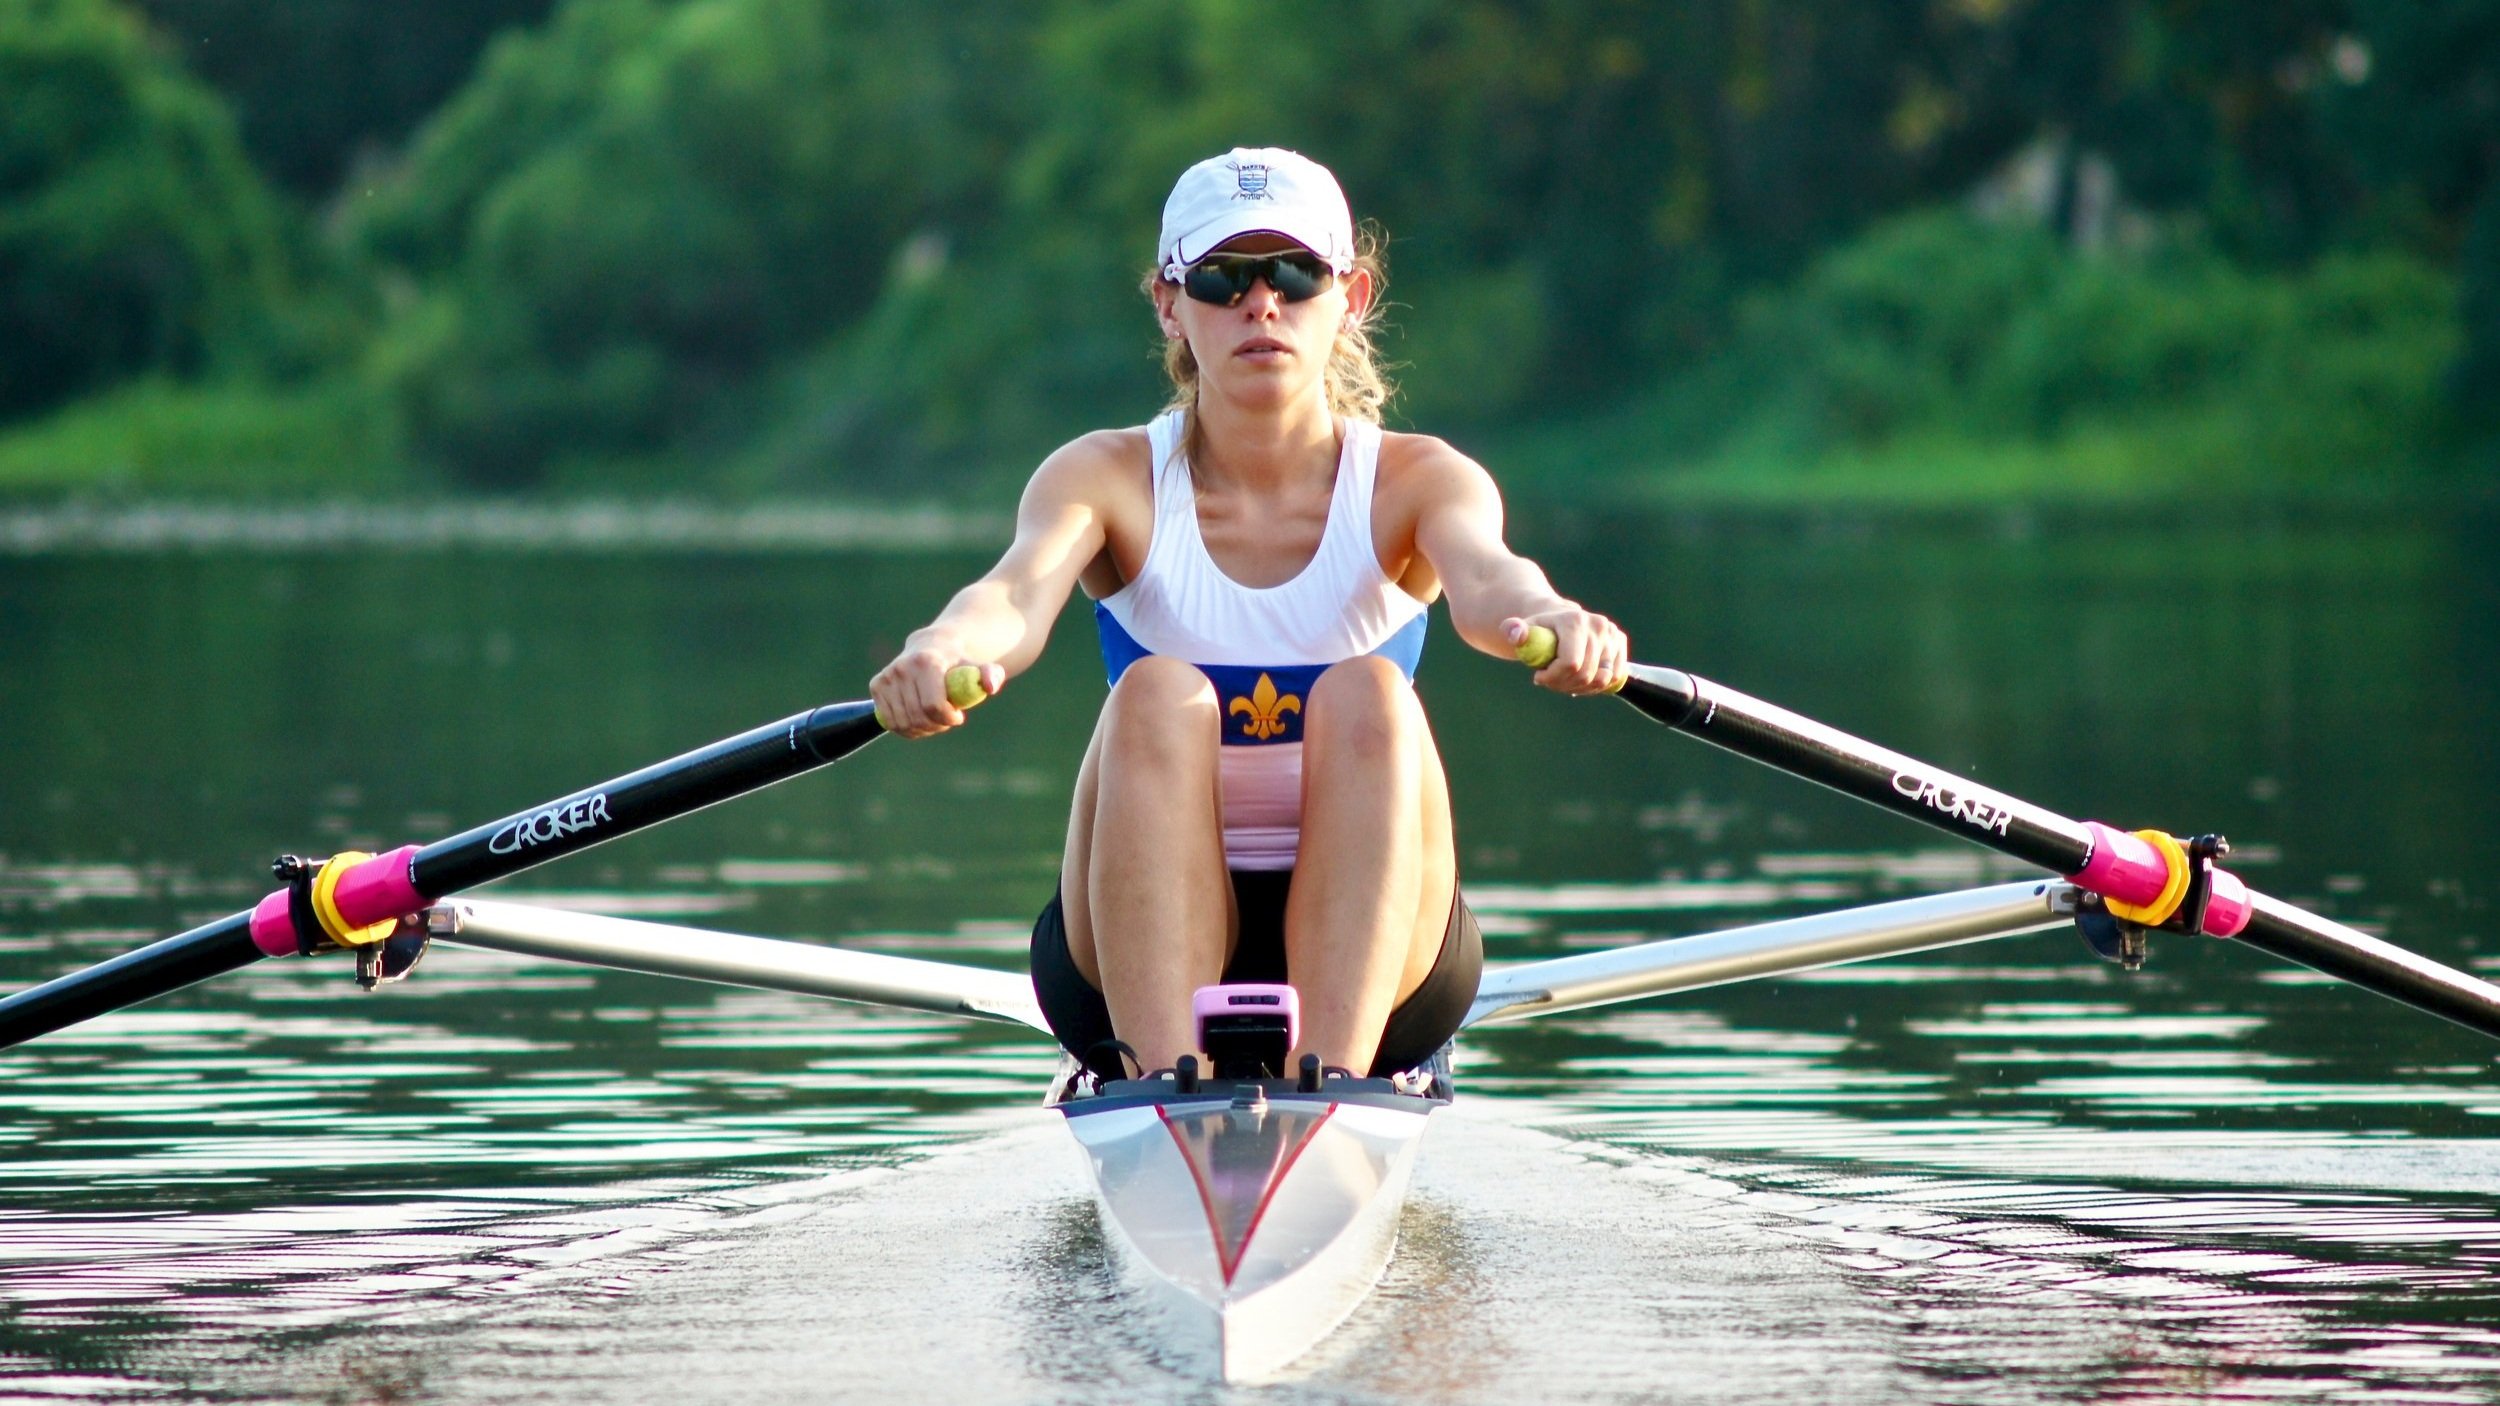 Hannah Huppi is a member of the USRowing National Beach Sprints team, co-founder of ErgoFit in New Orleans, and is taking on the Pacific because she has something to prove.